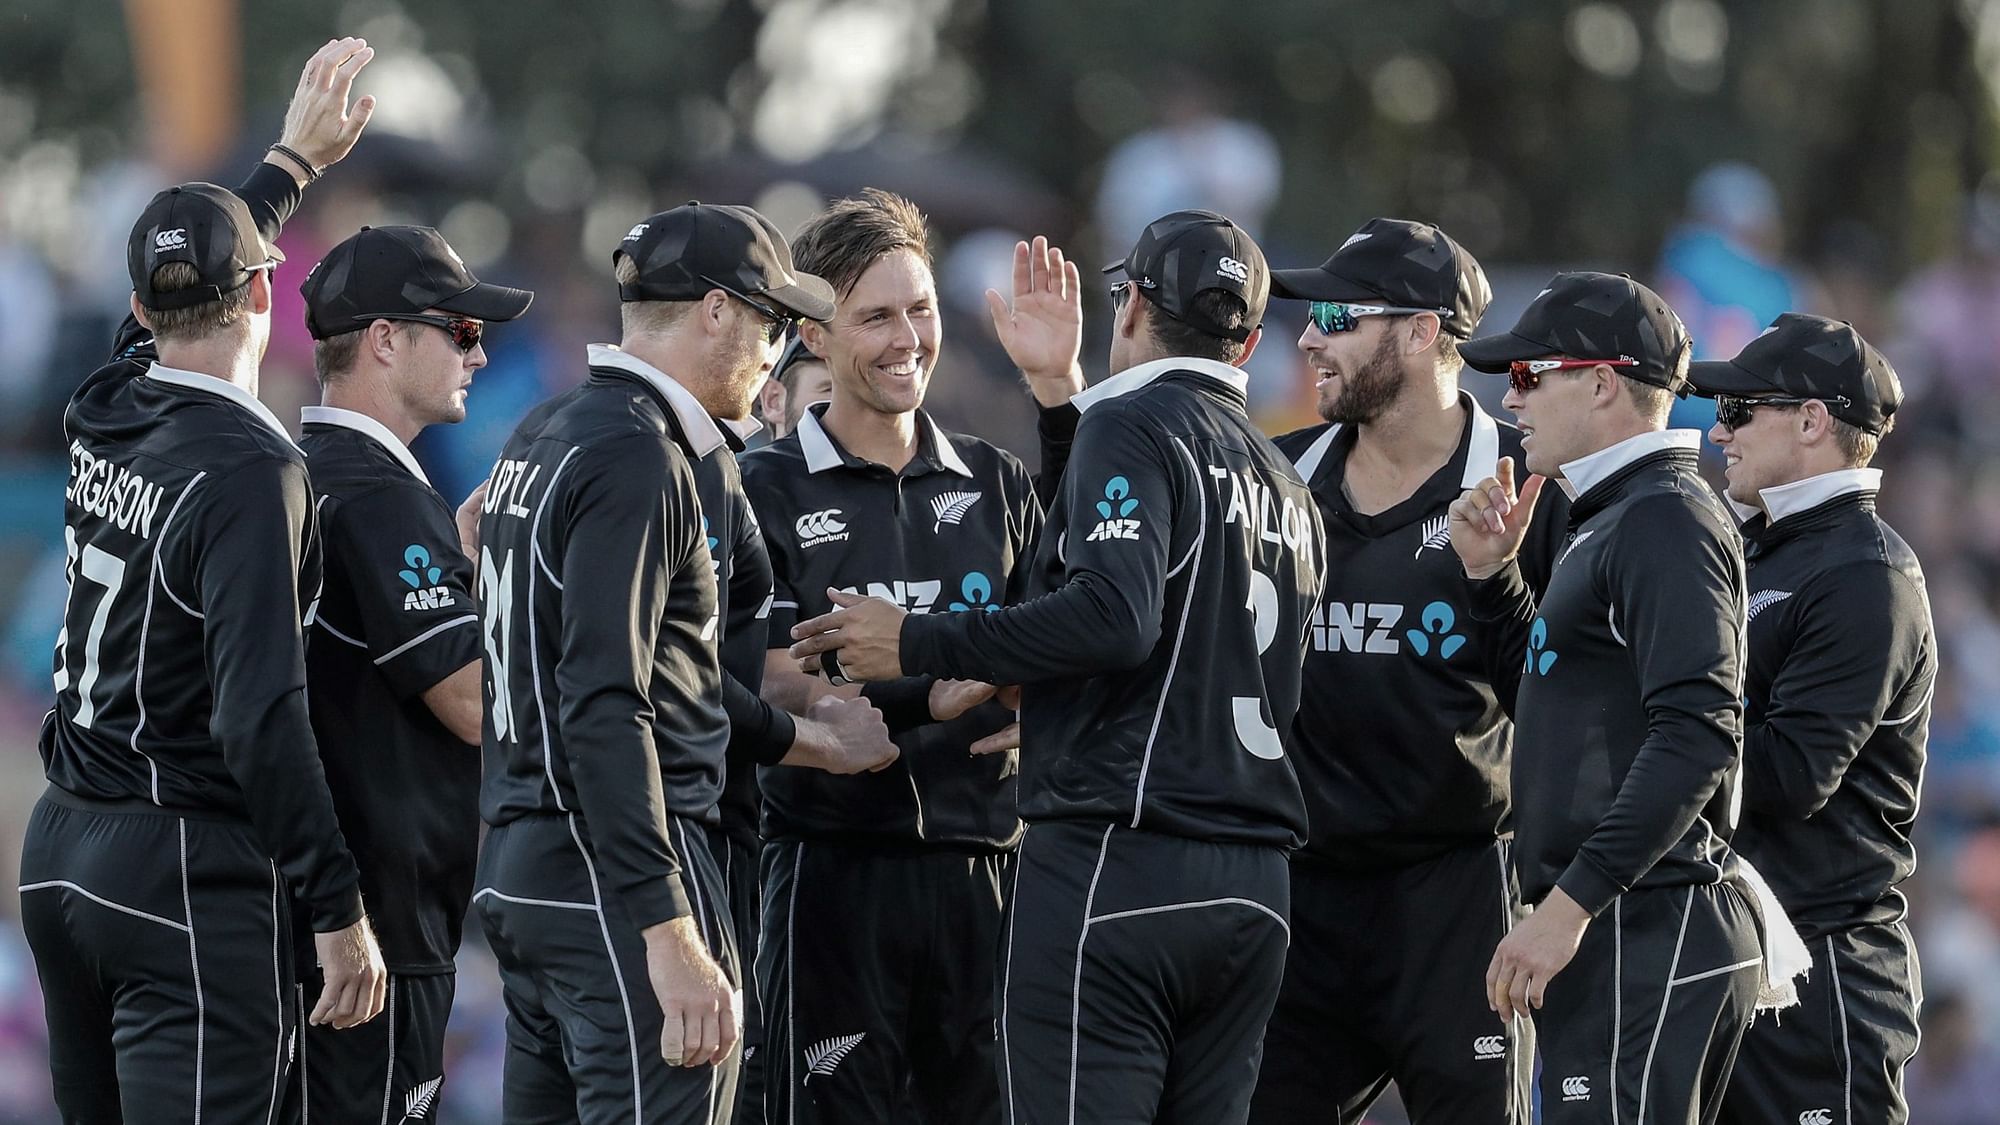 Are New Zealand the team who could pull off an upset and win this 2019 ICC World Cup?